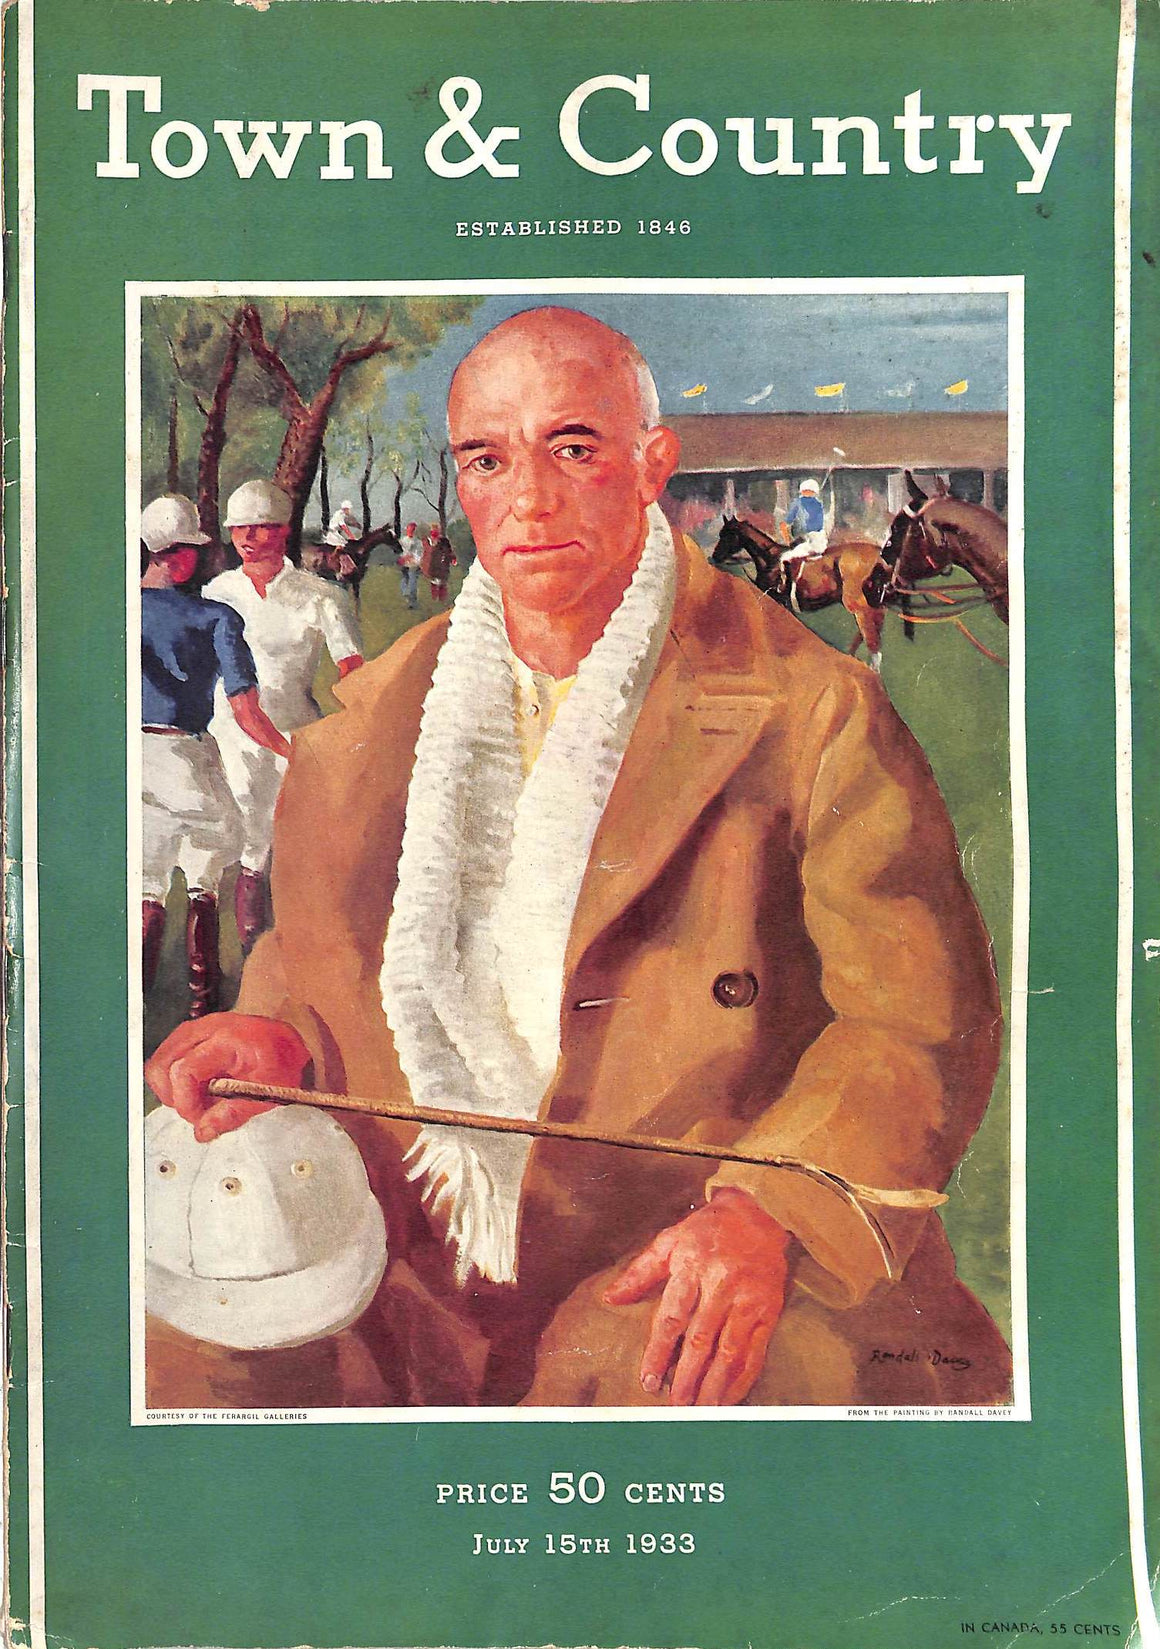 "Town & Country Magazine July 15th 1933"